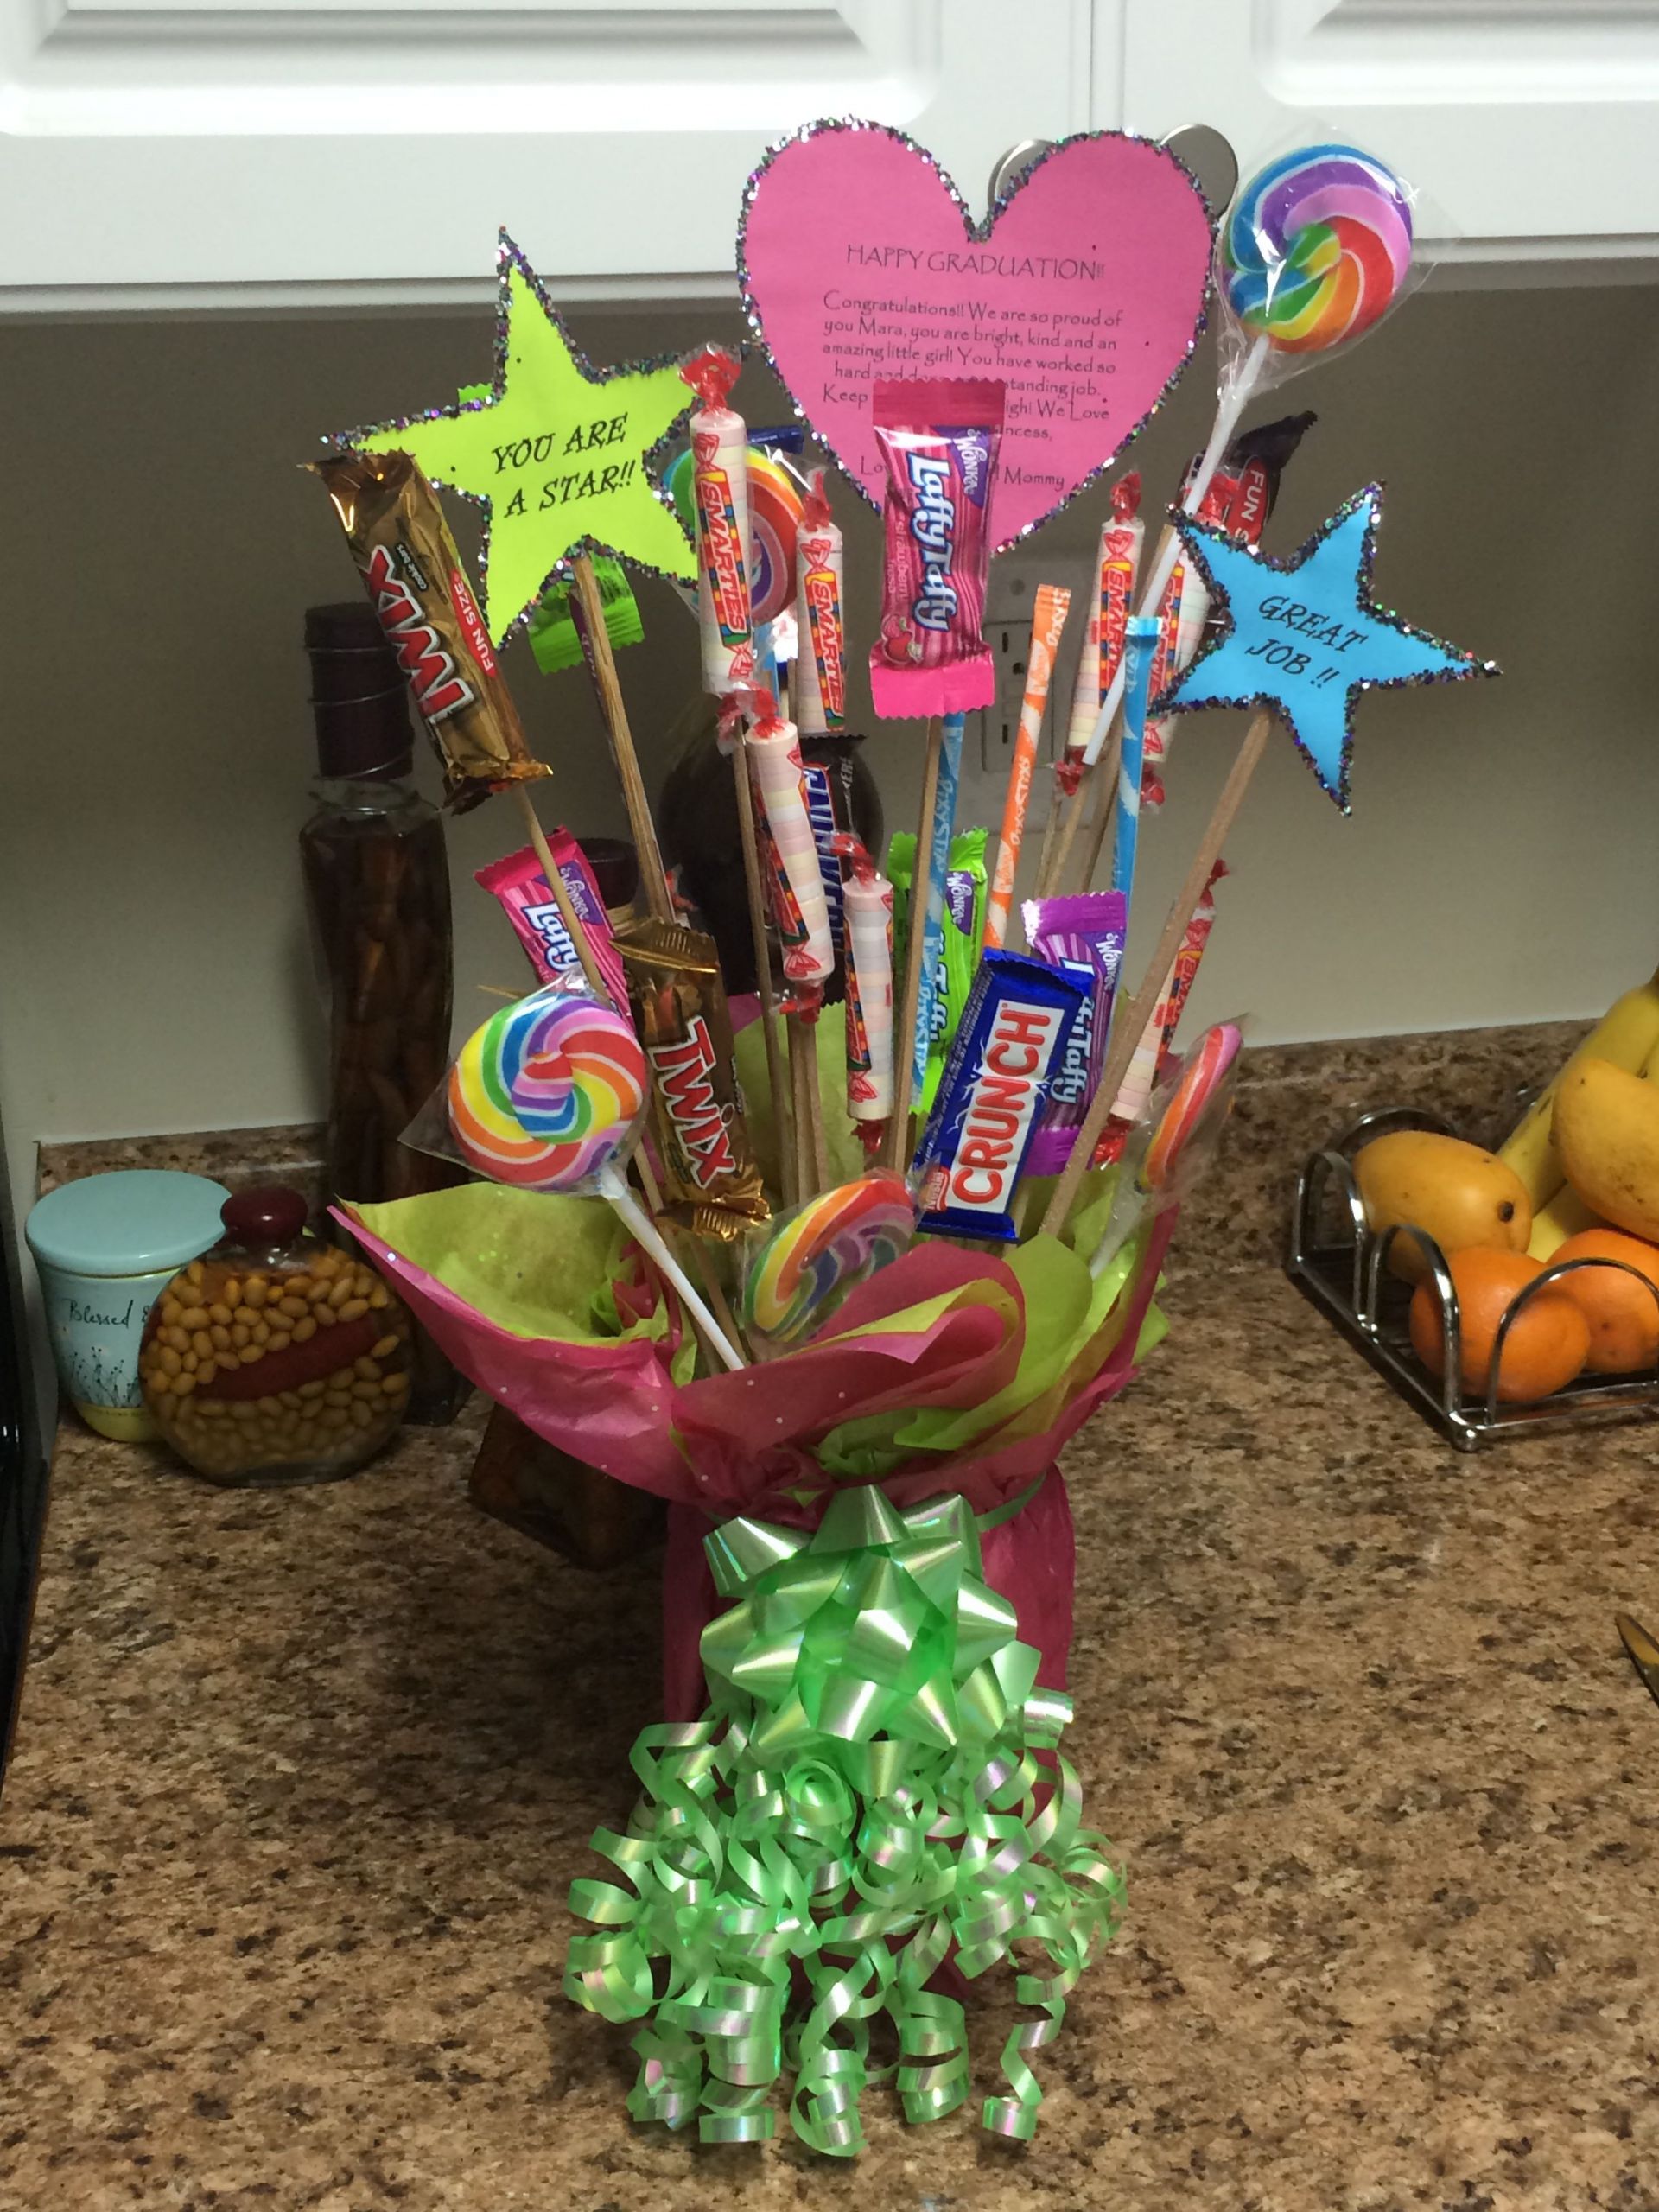 Grade School Graduation Gift Ideas
 This is a t bouquet I made for my daughter s 5th grade